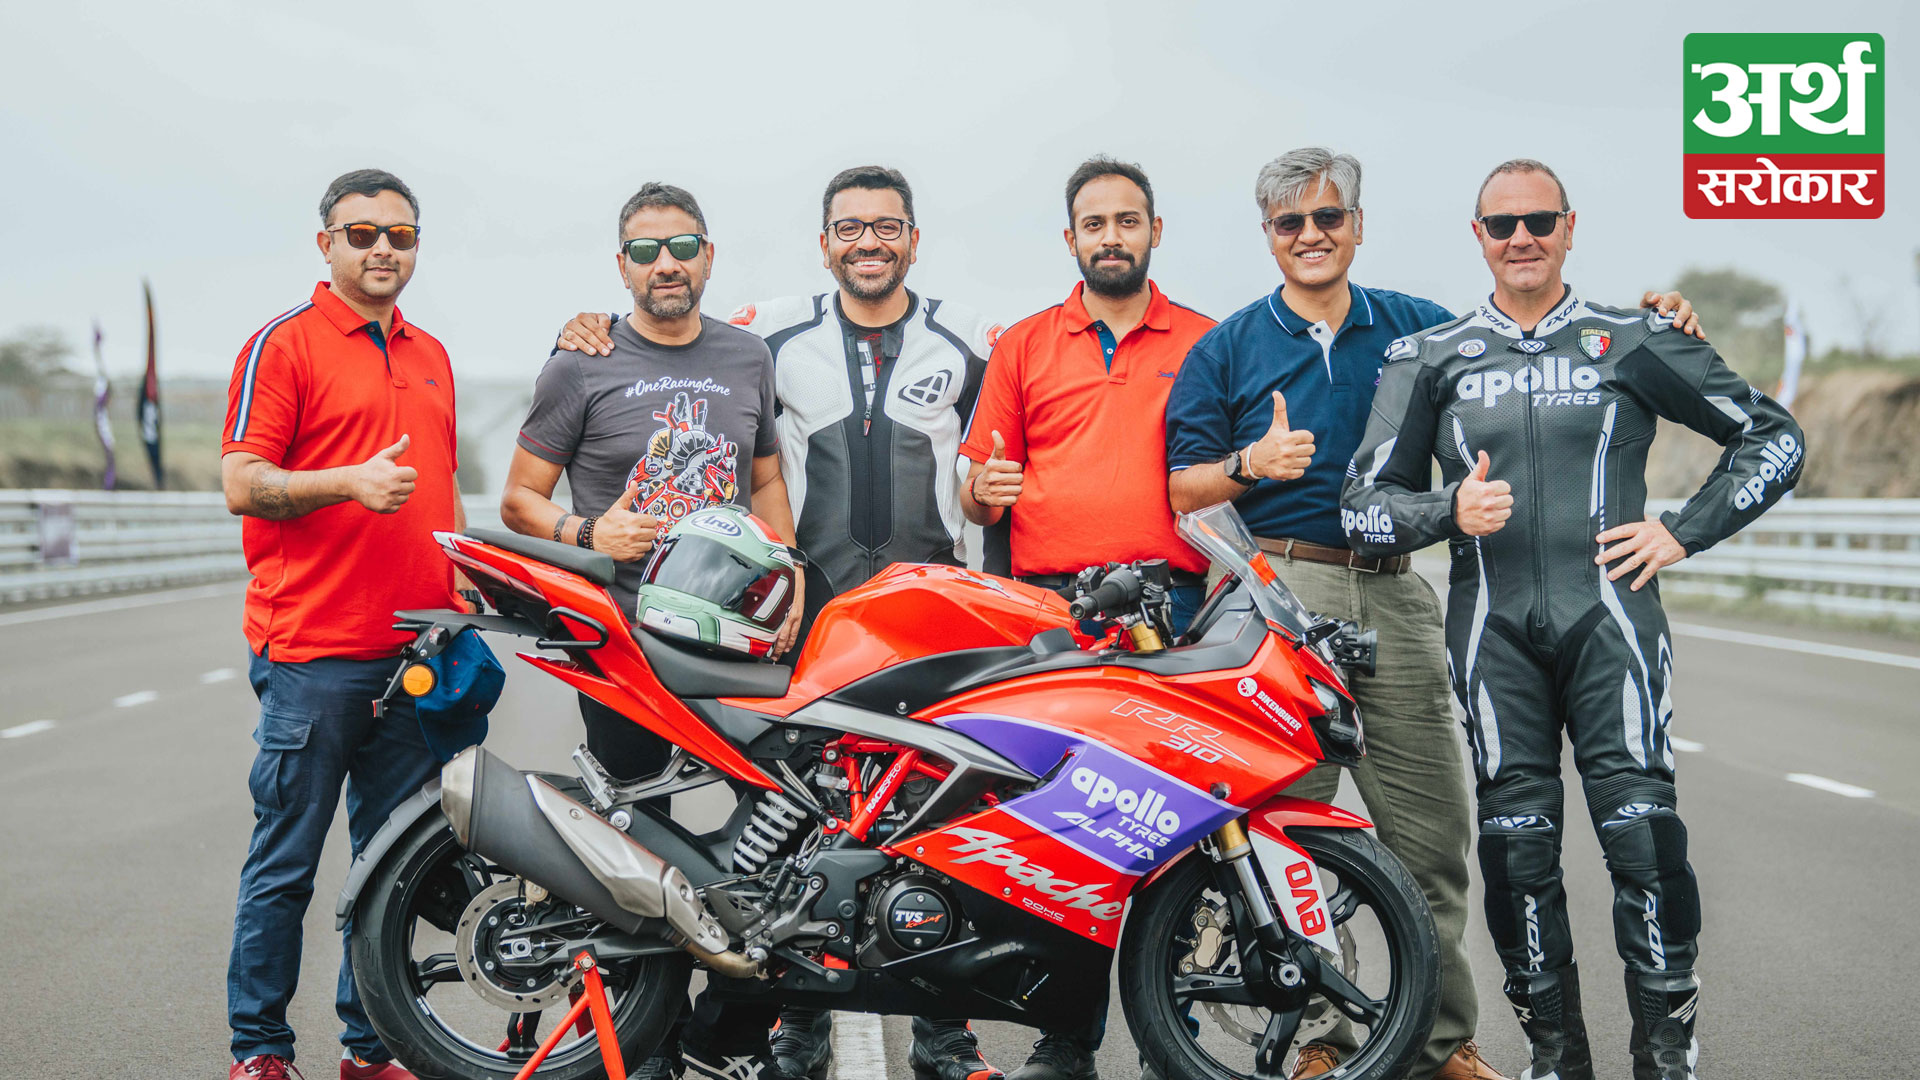 TVS Motor Company set a new 24-hour Indian National Speed Endurance Record on the TVS Apache RR 310